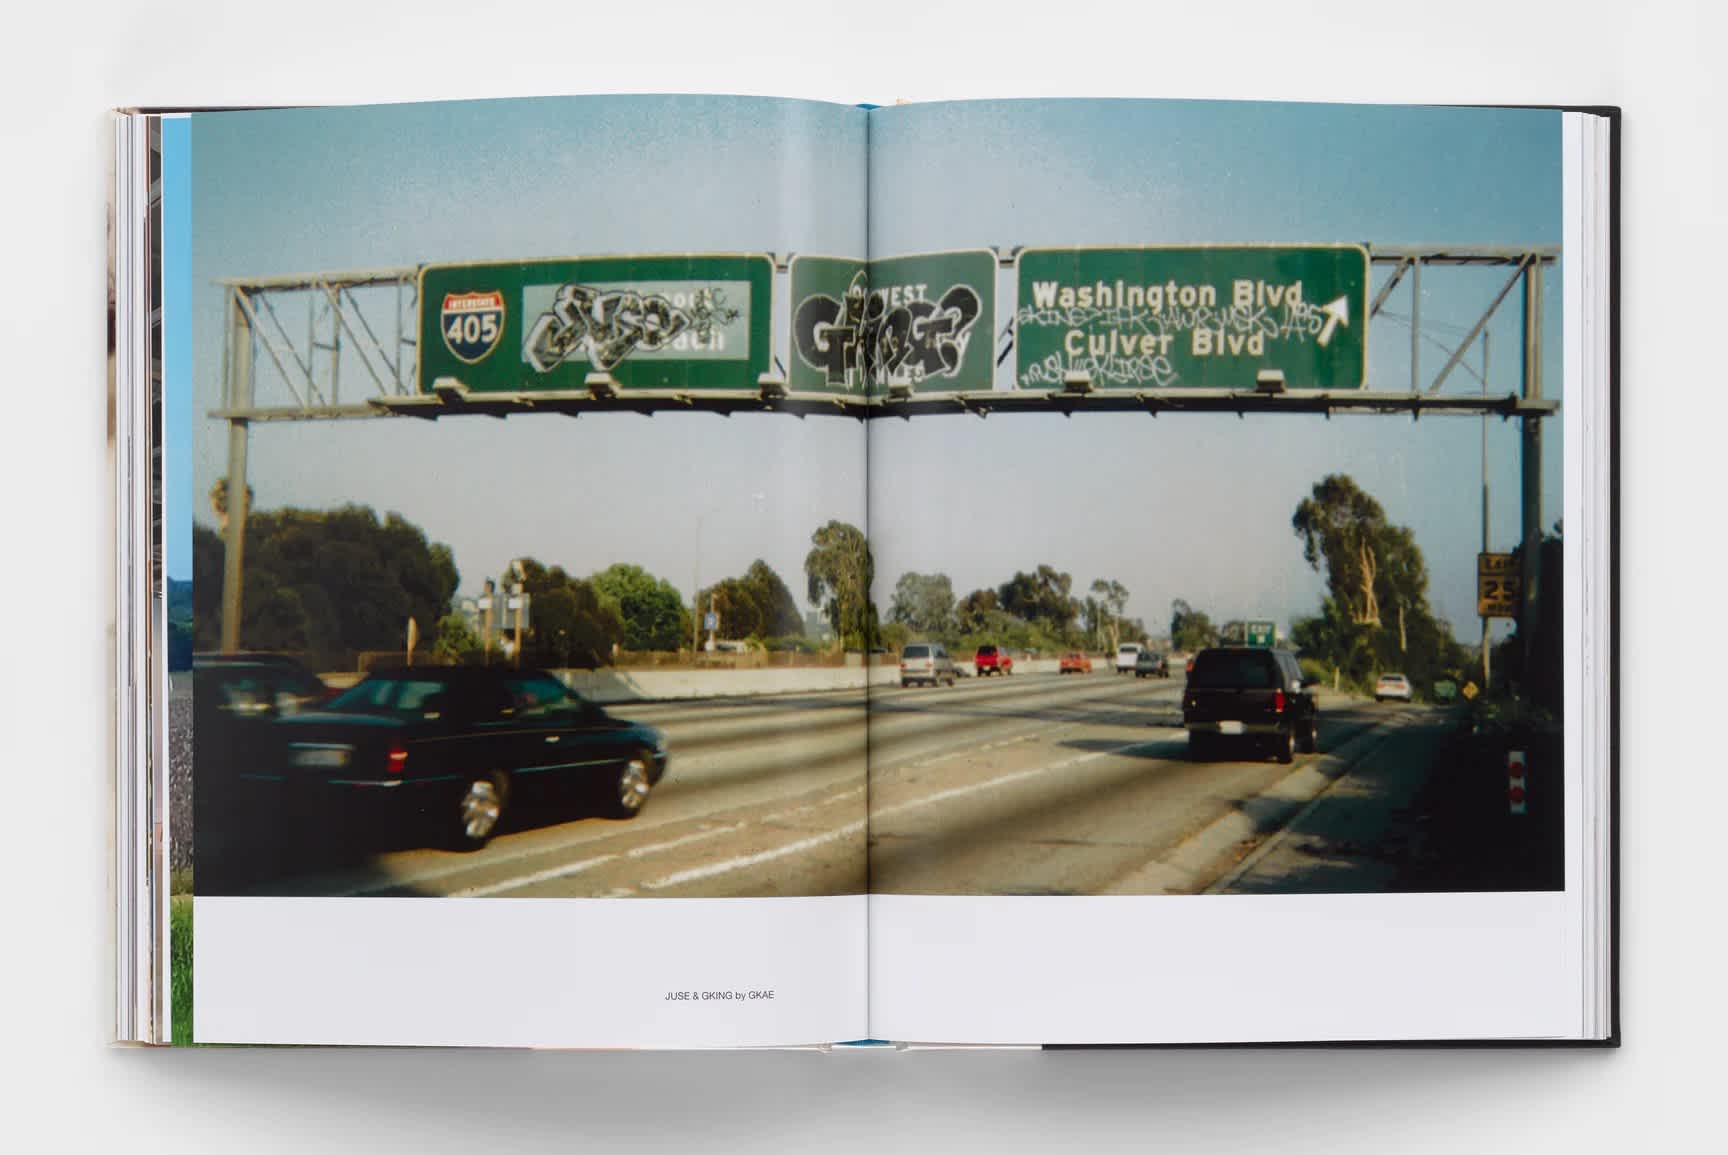 An old film photograph of a Los Angeles freeway sign covered in graffiti stretches across two pages inside of an open book.